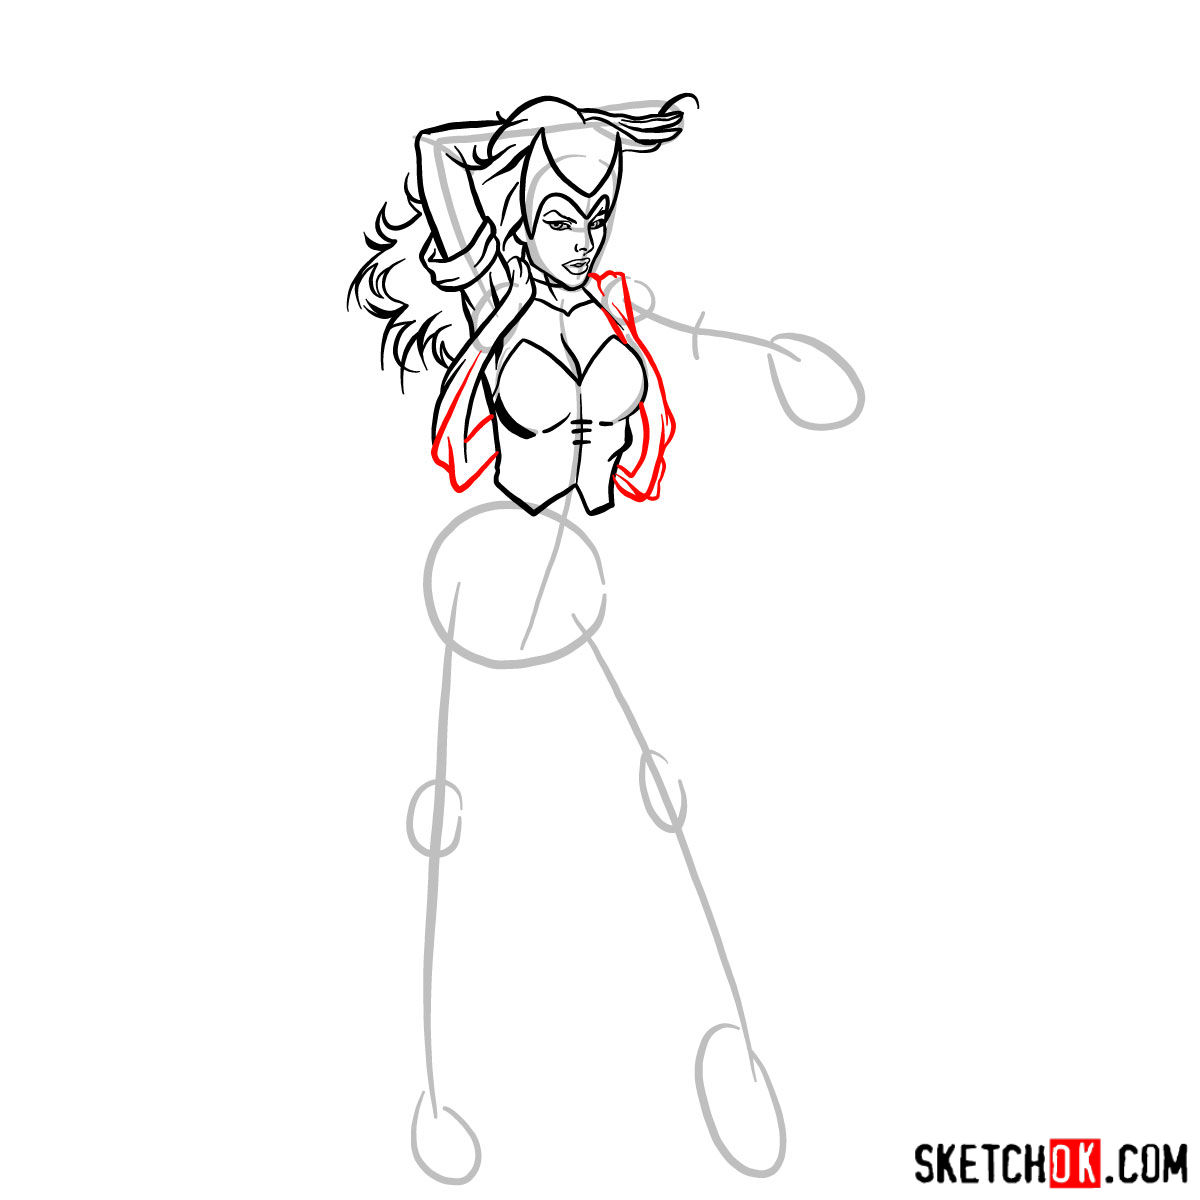 How to draw Scarlet Witch from Marvel Comics - step 08